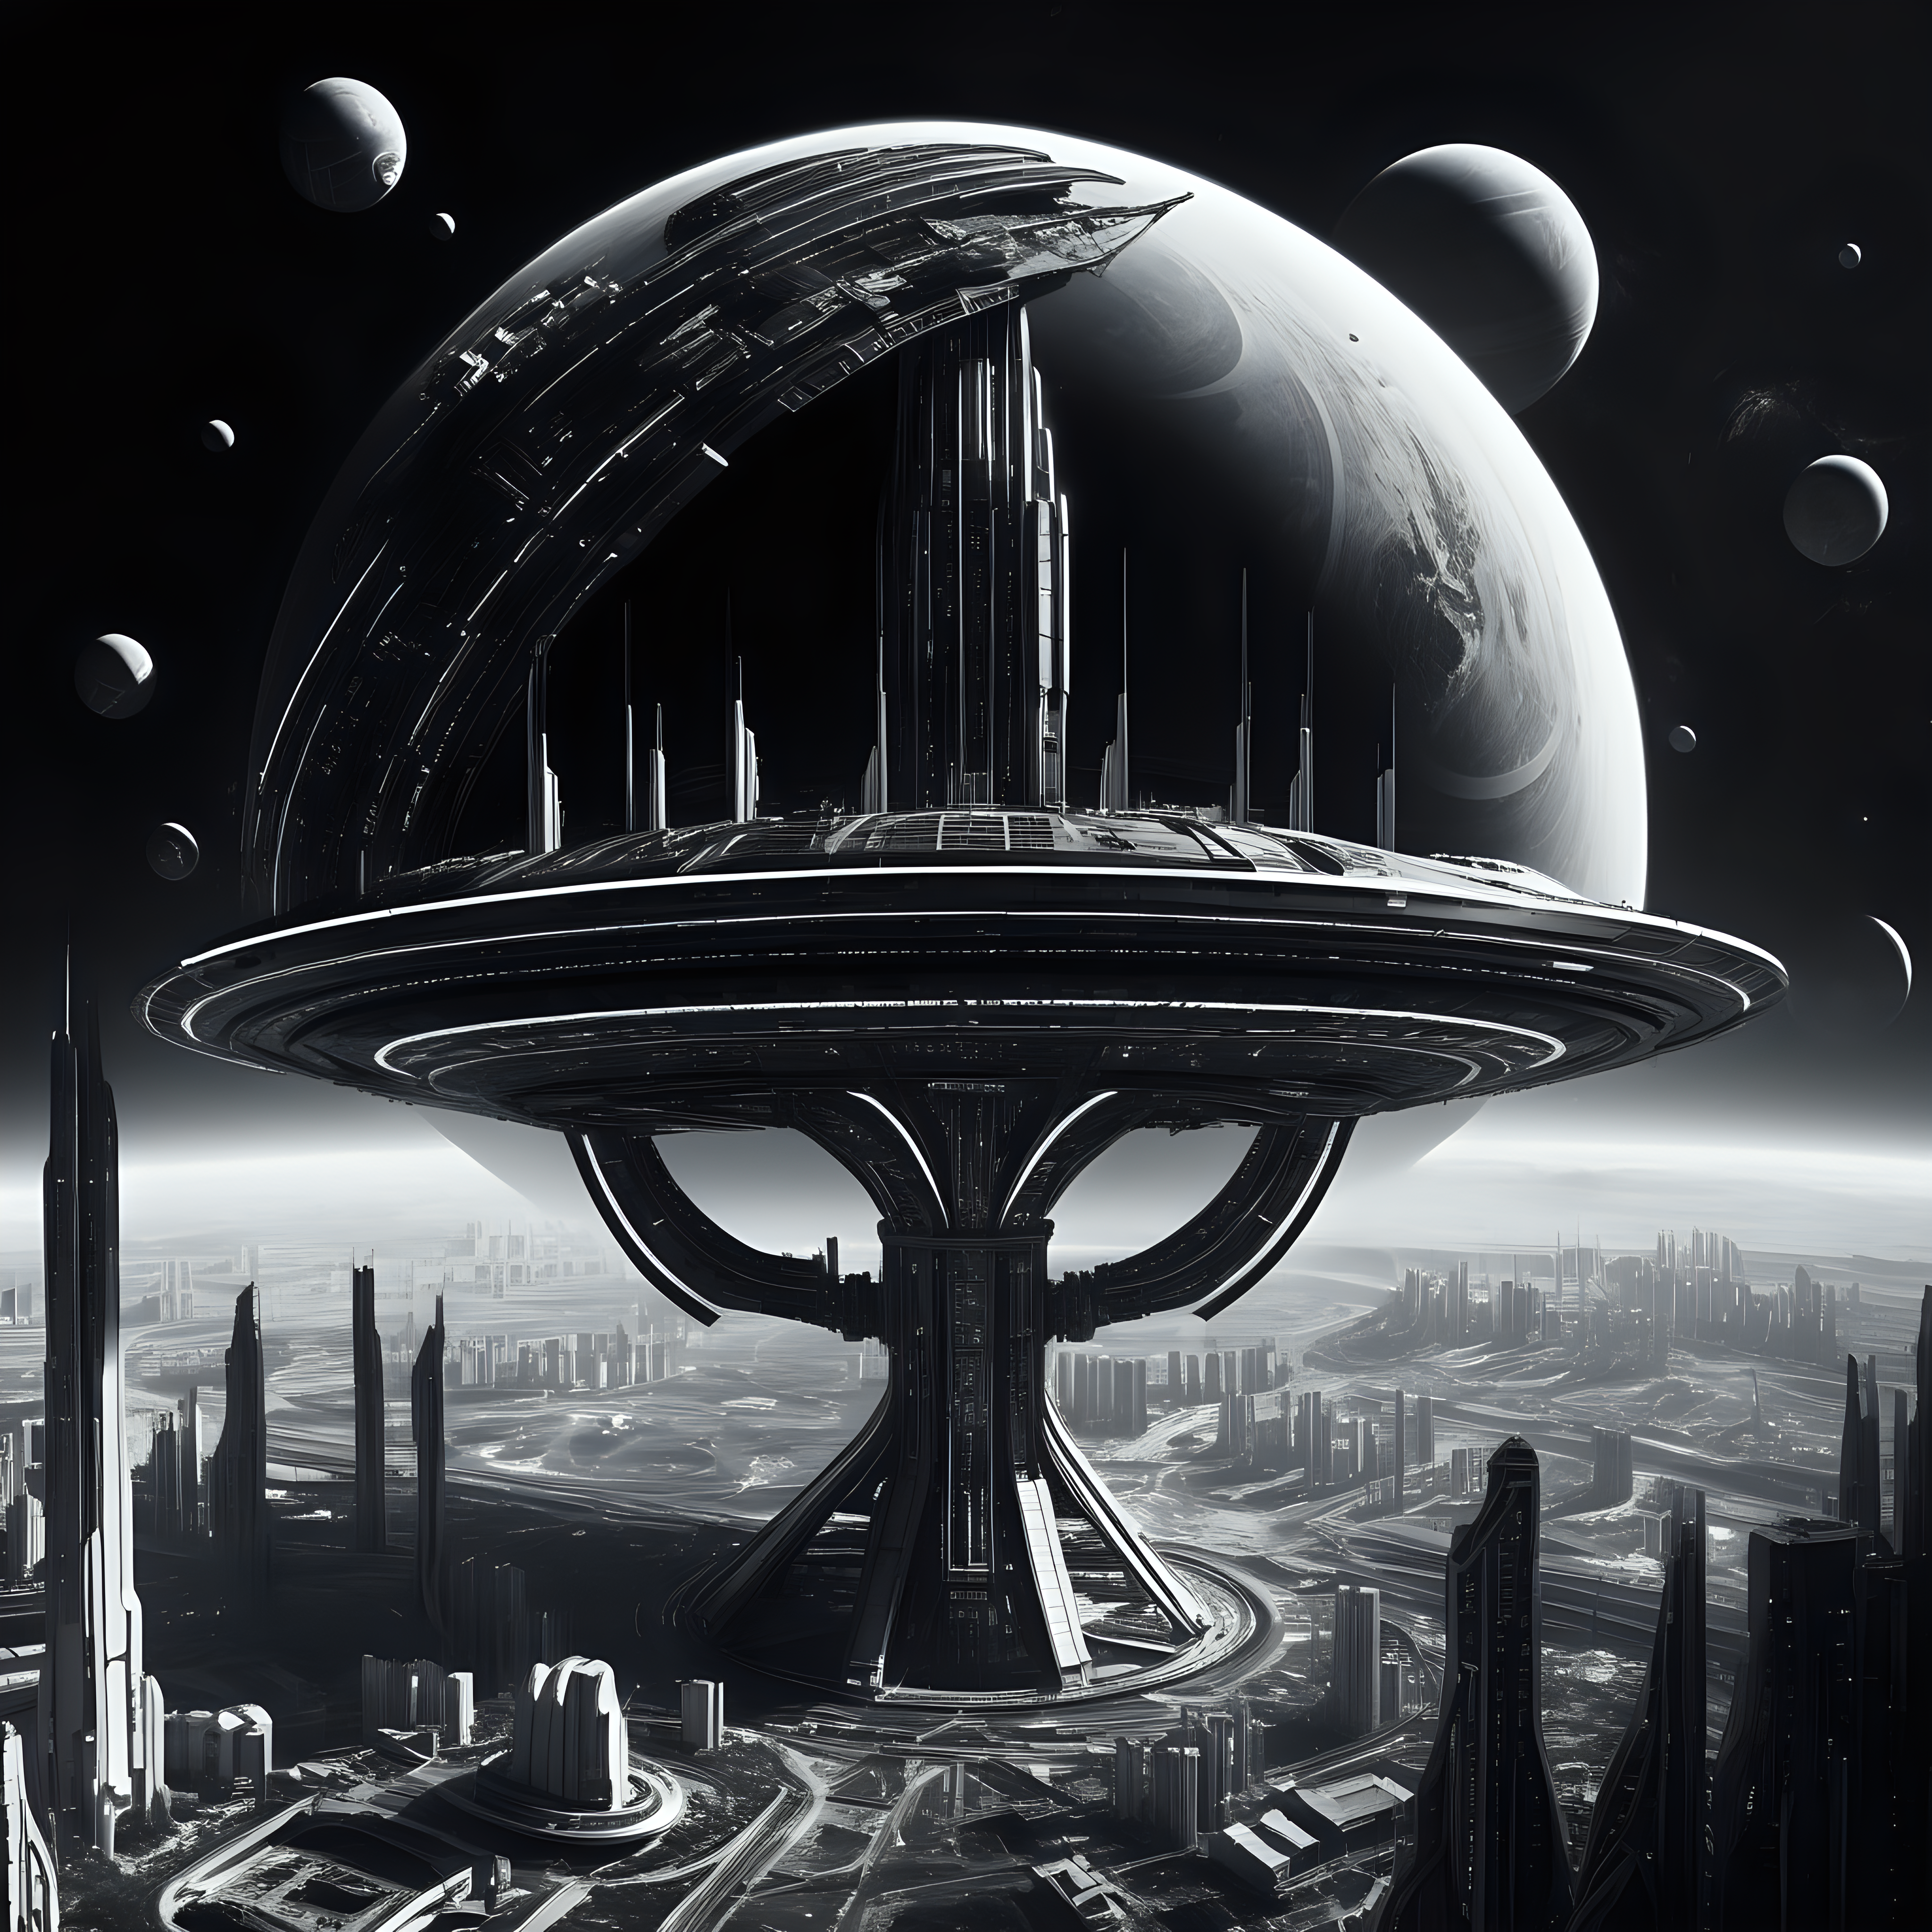 black and white futuristic space station in orbit of a planet covered in one city